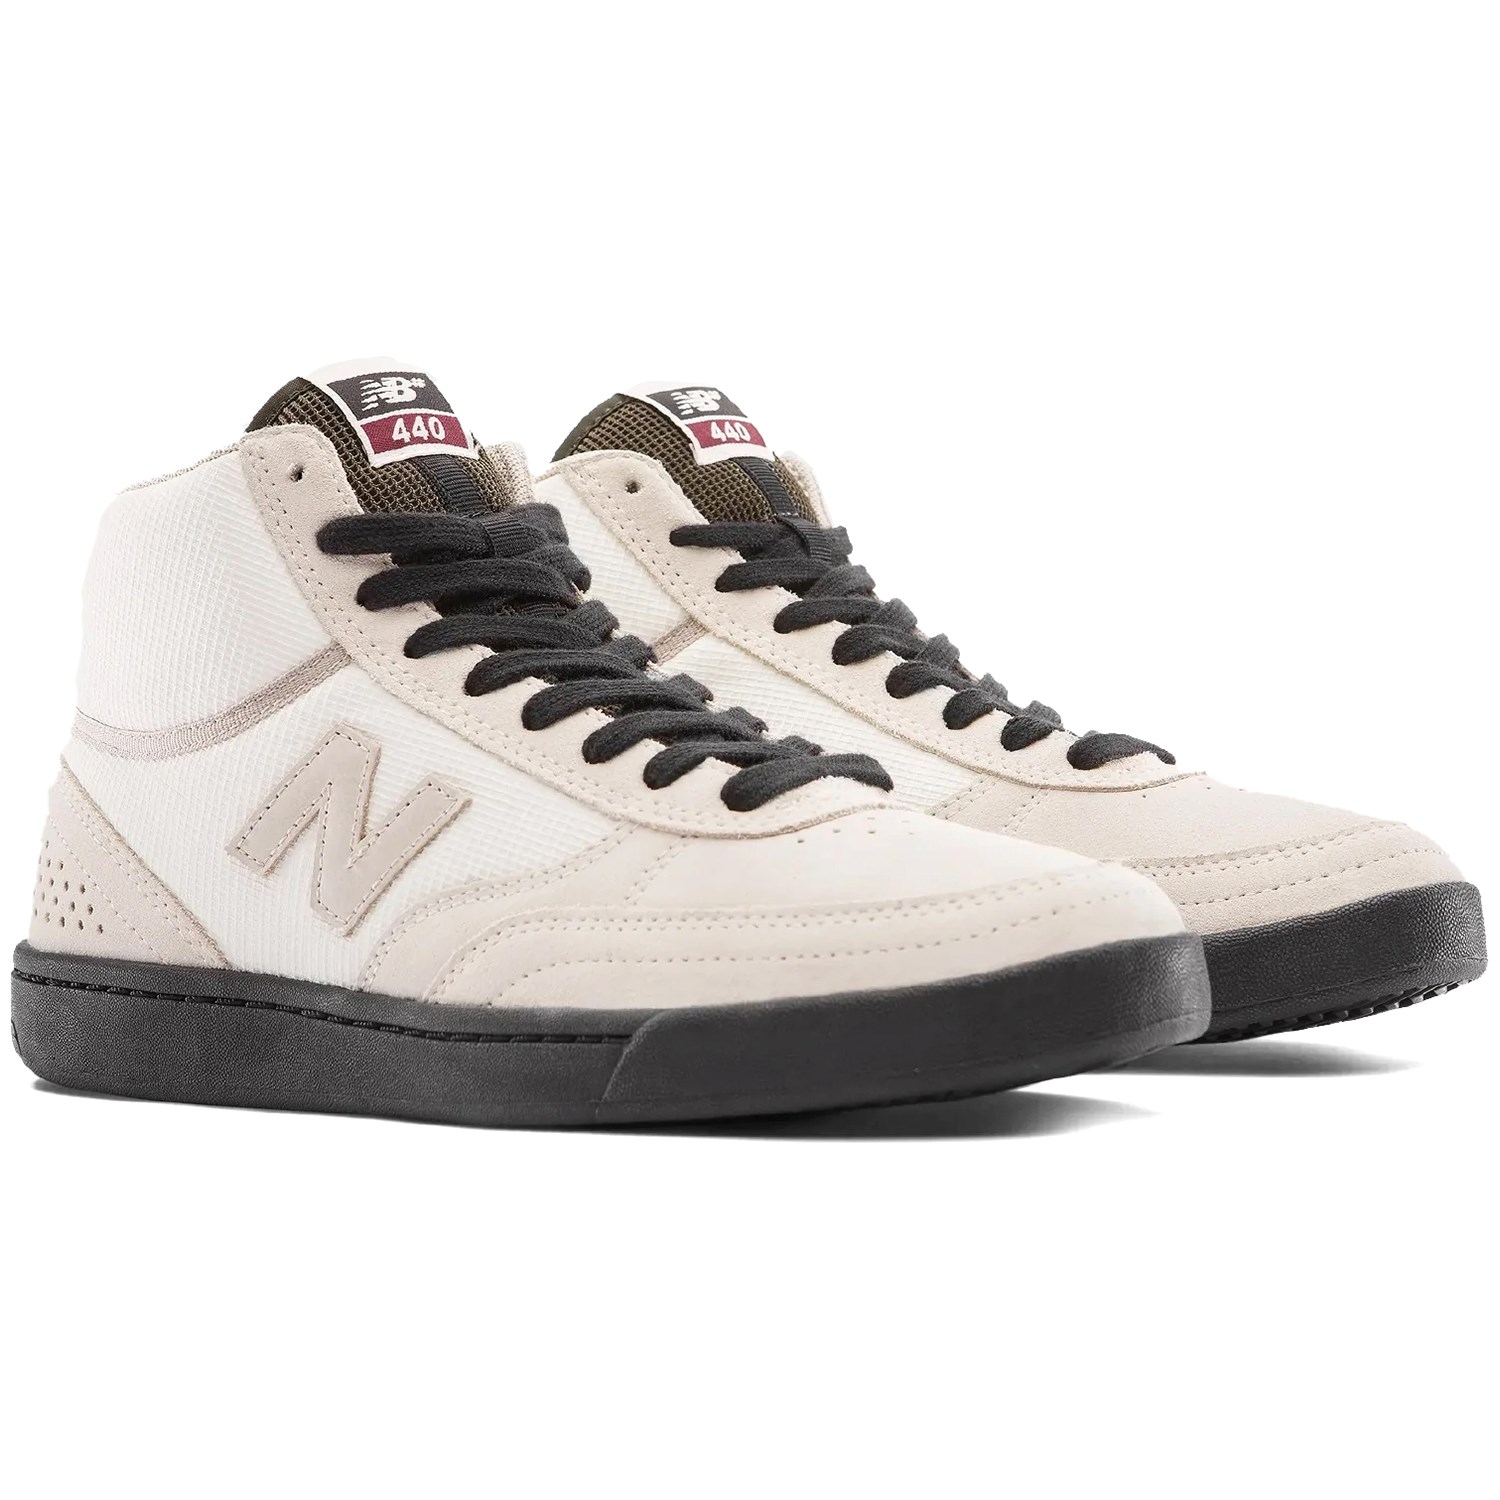 New Balance Numeric 440 High Shoes